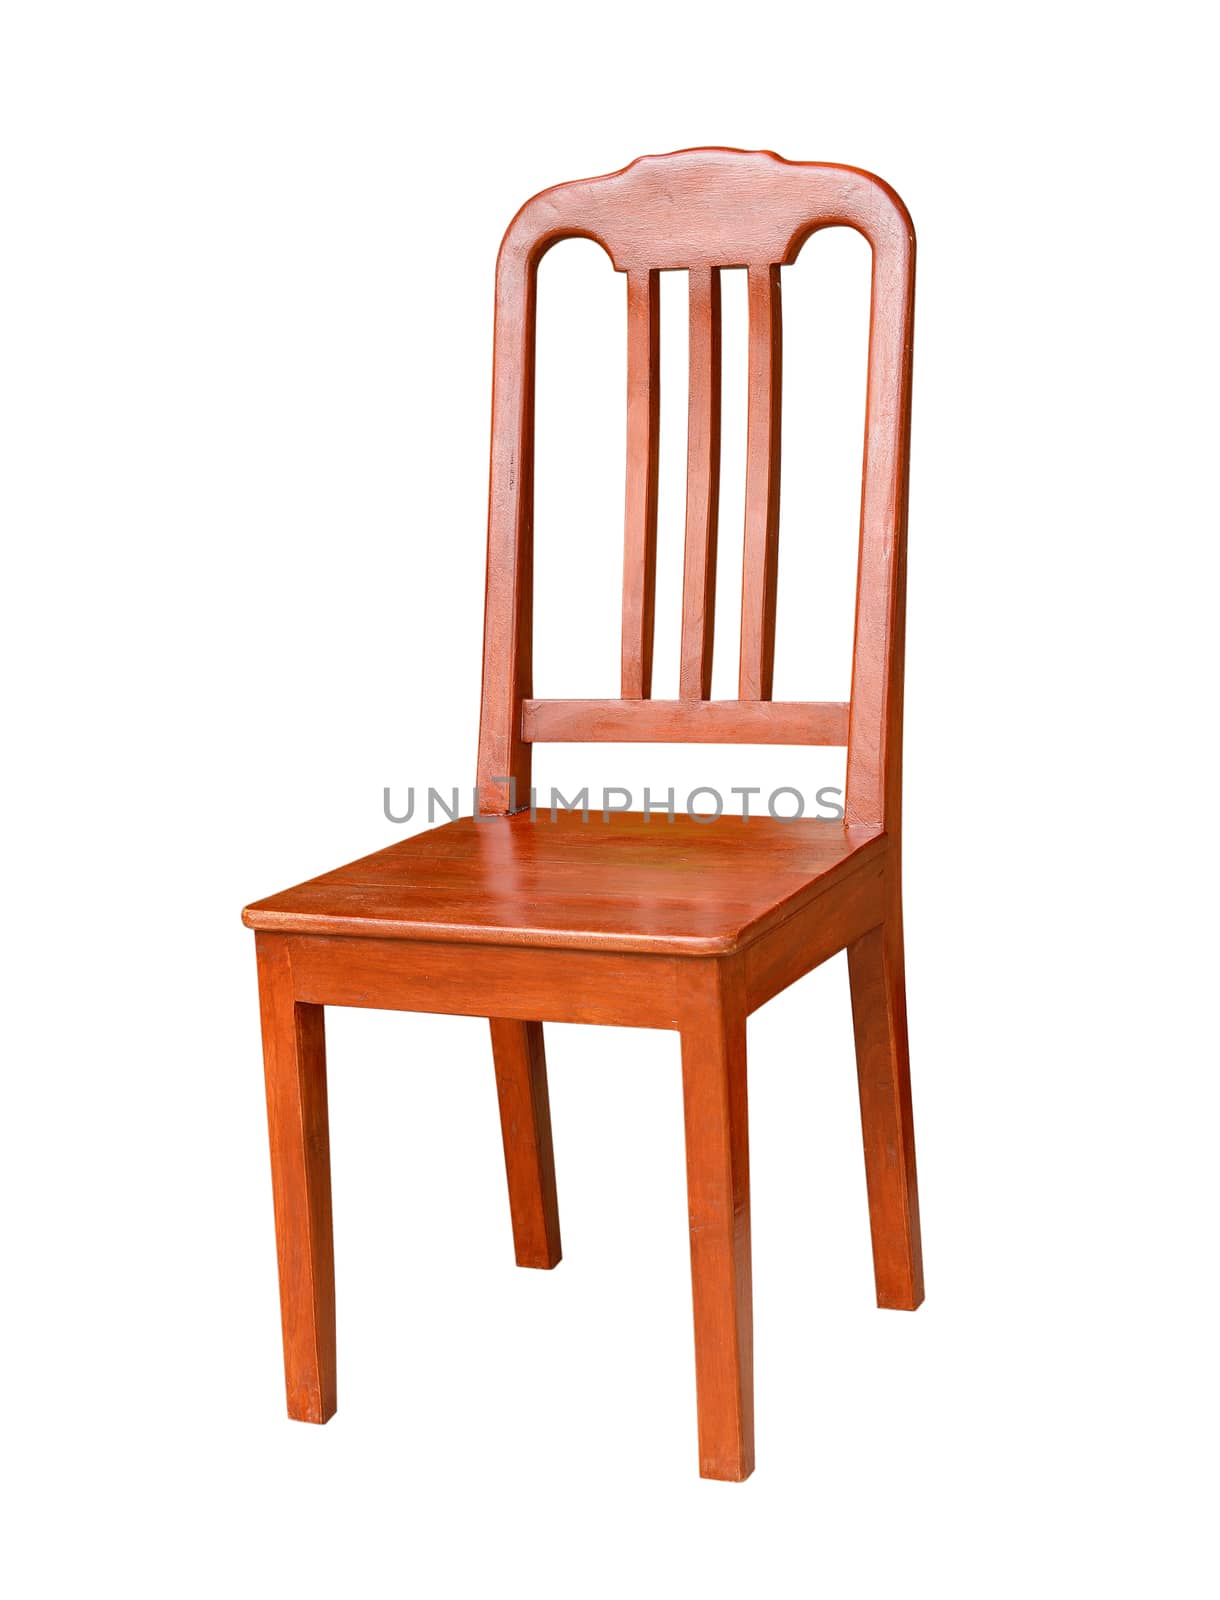 chair on white background by sommai